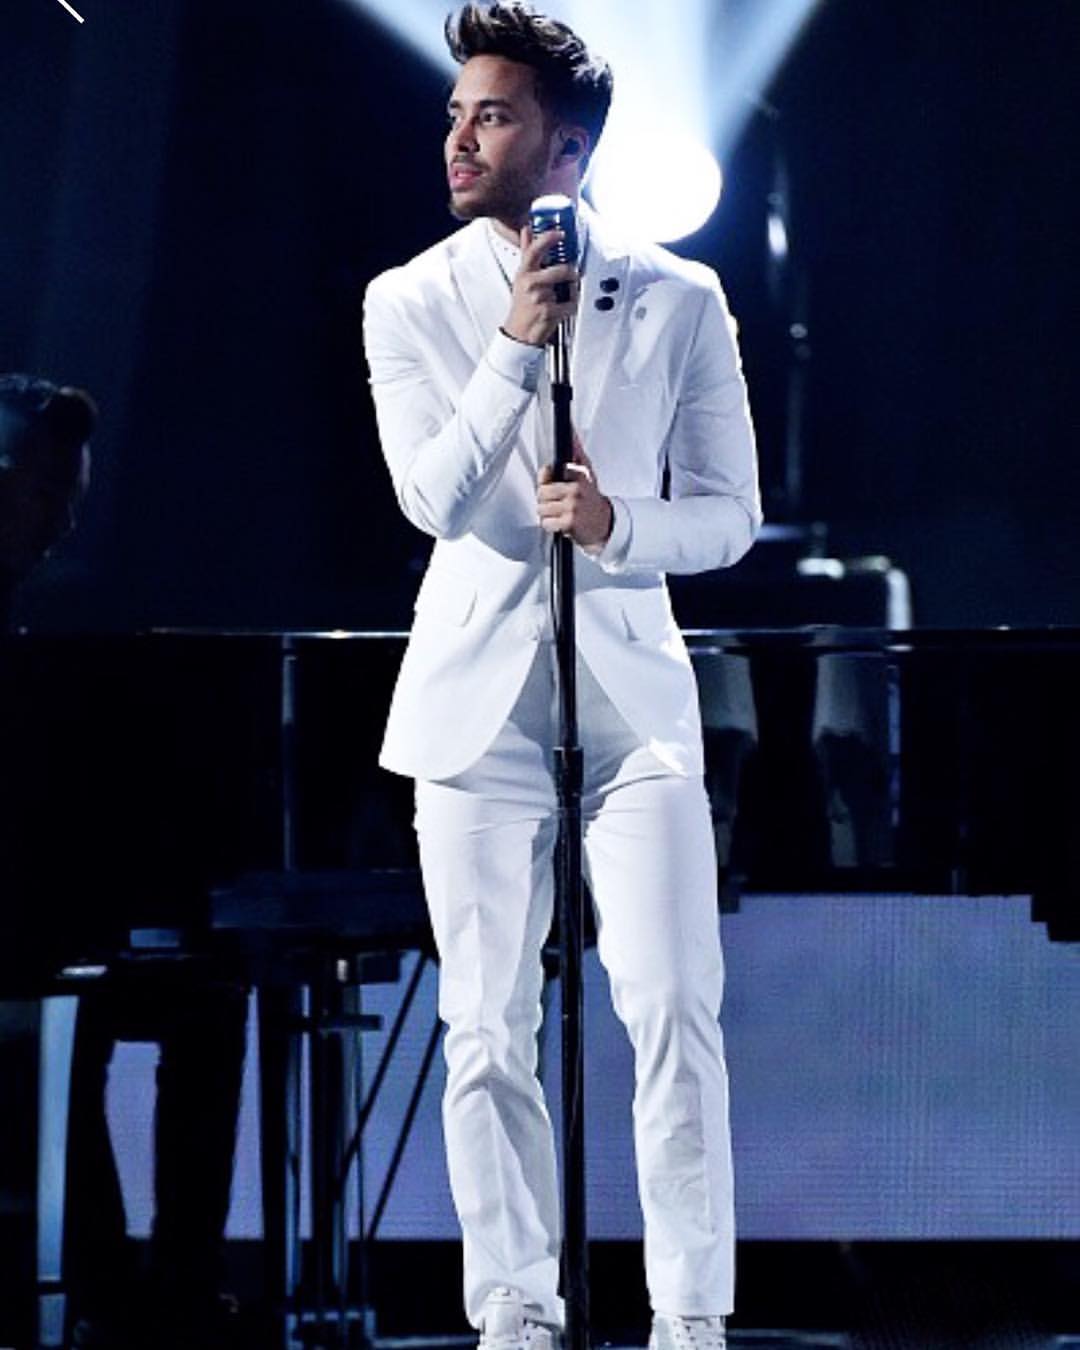 Prince Royce rocked the Latin Grammys just sayin. Music is life